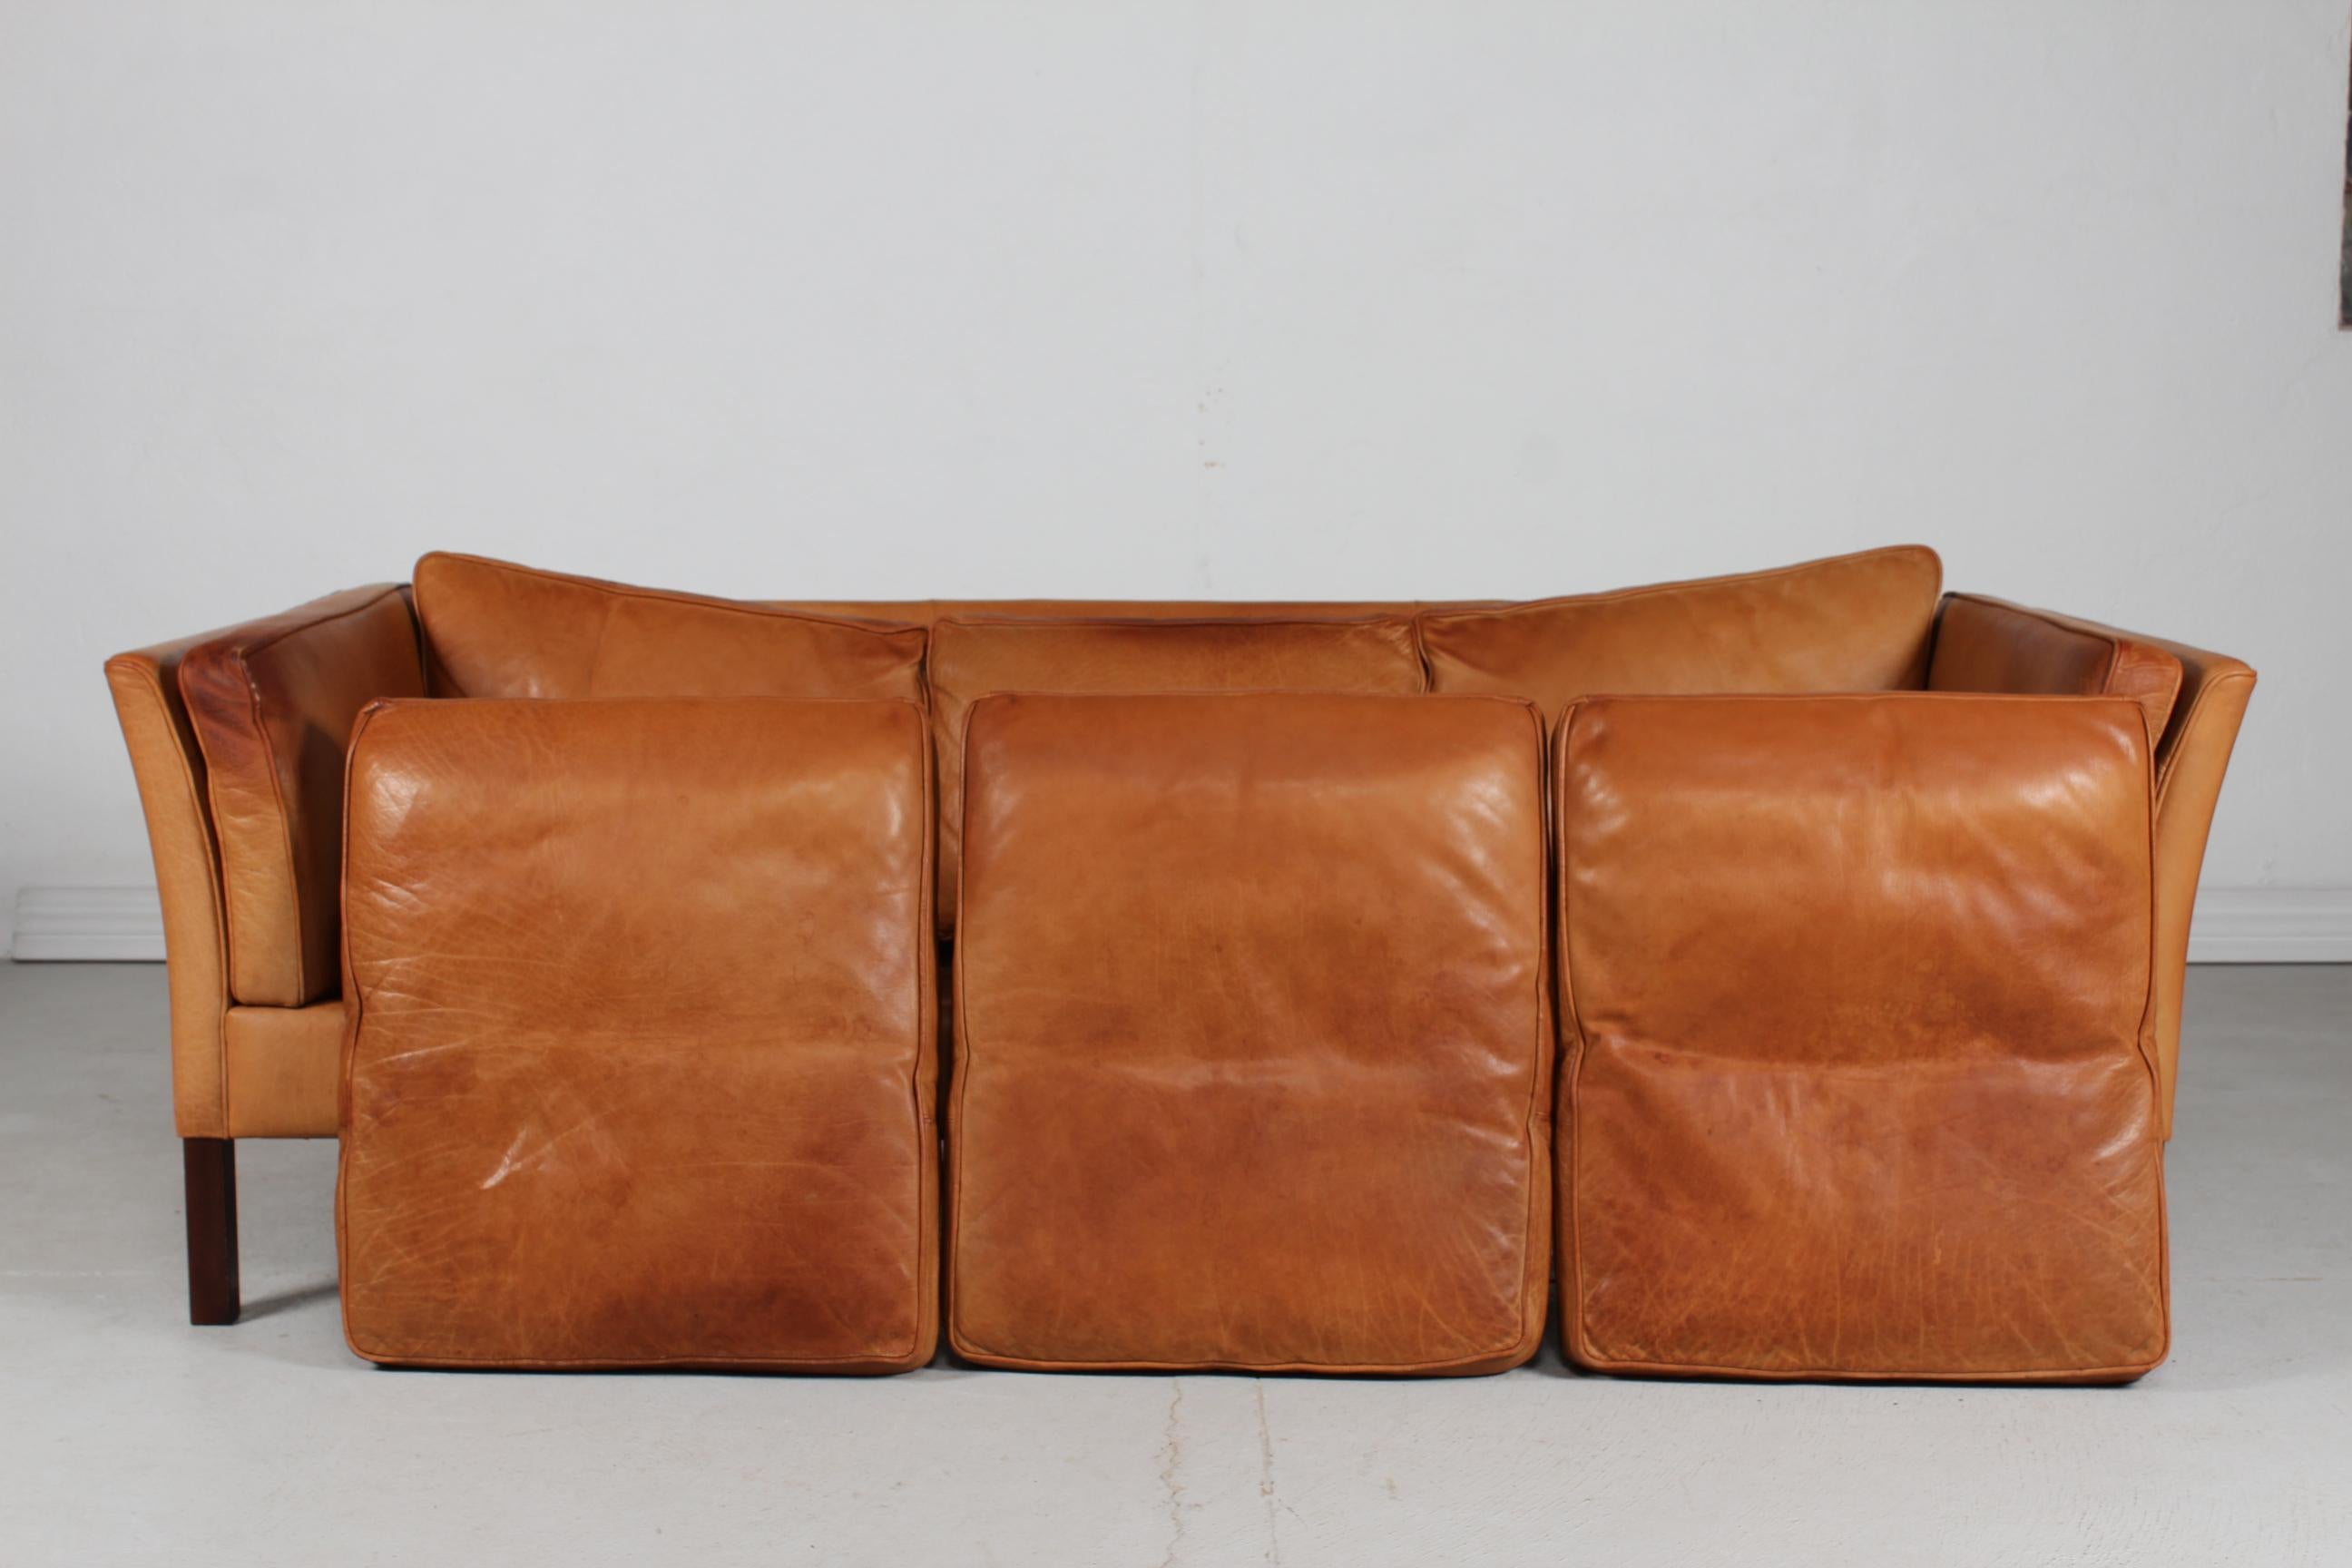 Danish Modern 3-Seat Sofa with Patinated Cognac-Colored Leather 1970s by Stouby 8